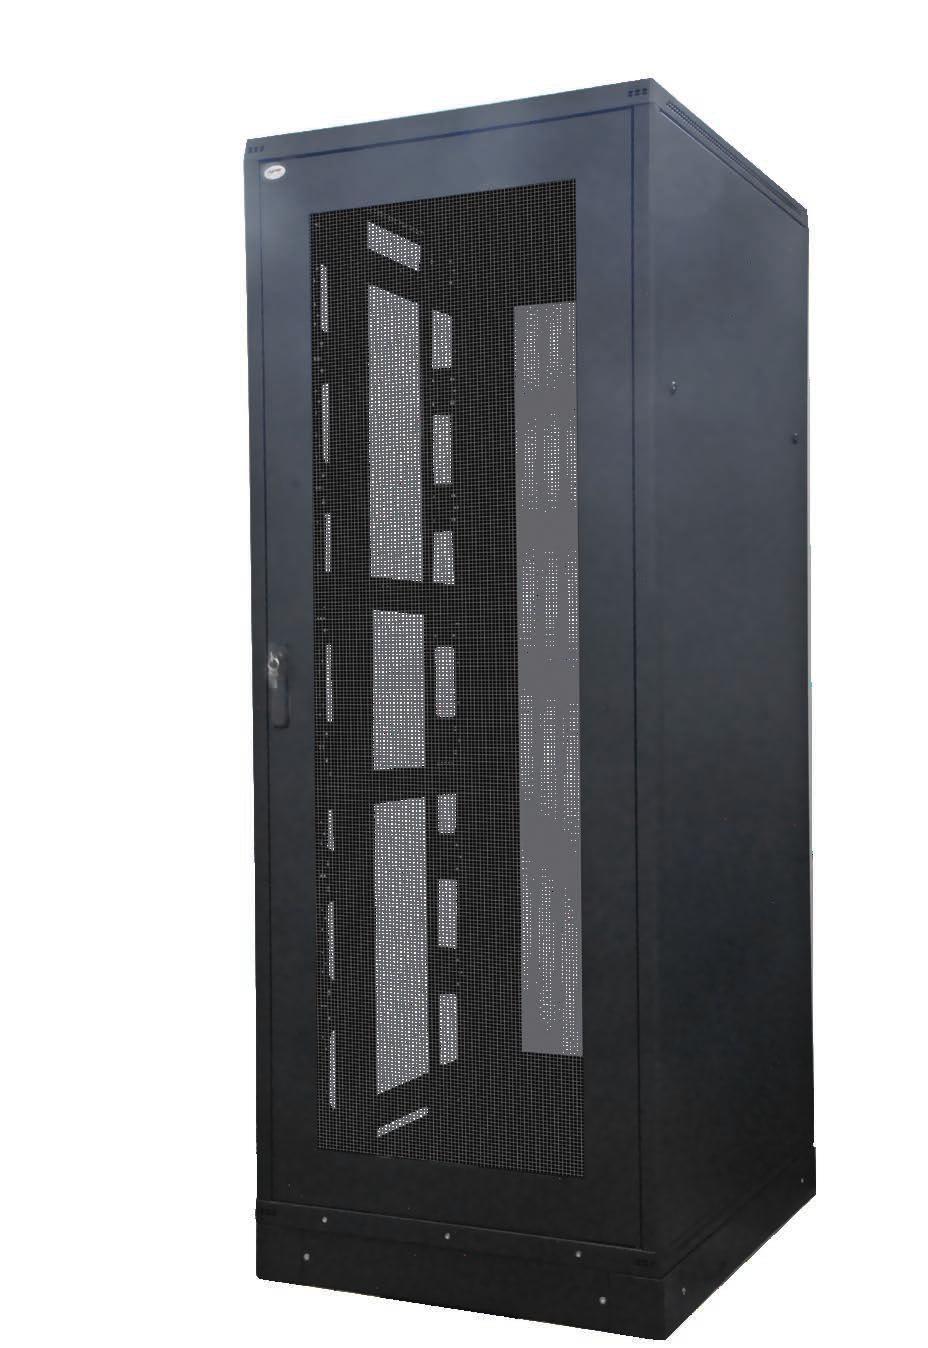 VT384-776316 Additional Bay 27U VT384-776545 VT384-776546 Ordering information Steel vented front & rear doors (fully assembled cabinets) Height 600 x 1000 mm 800 x 1000 mm Primary 43U